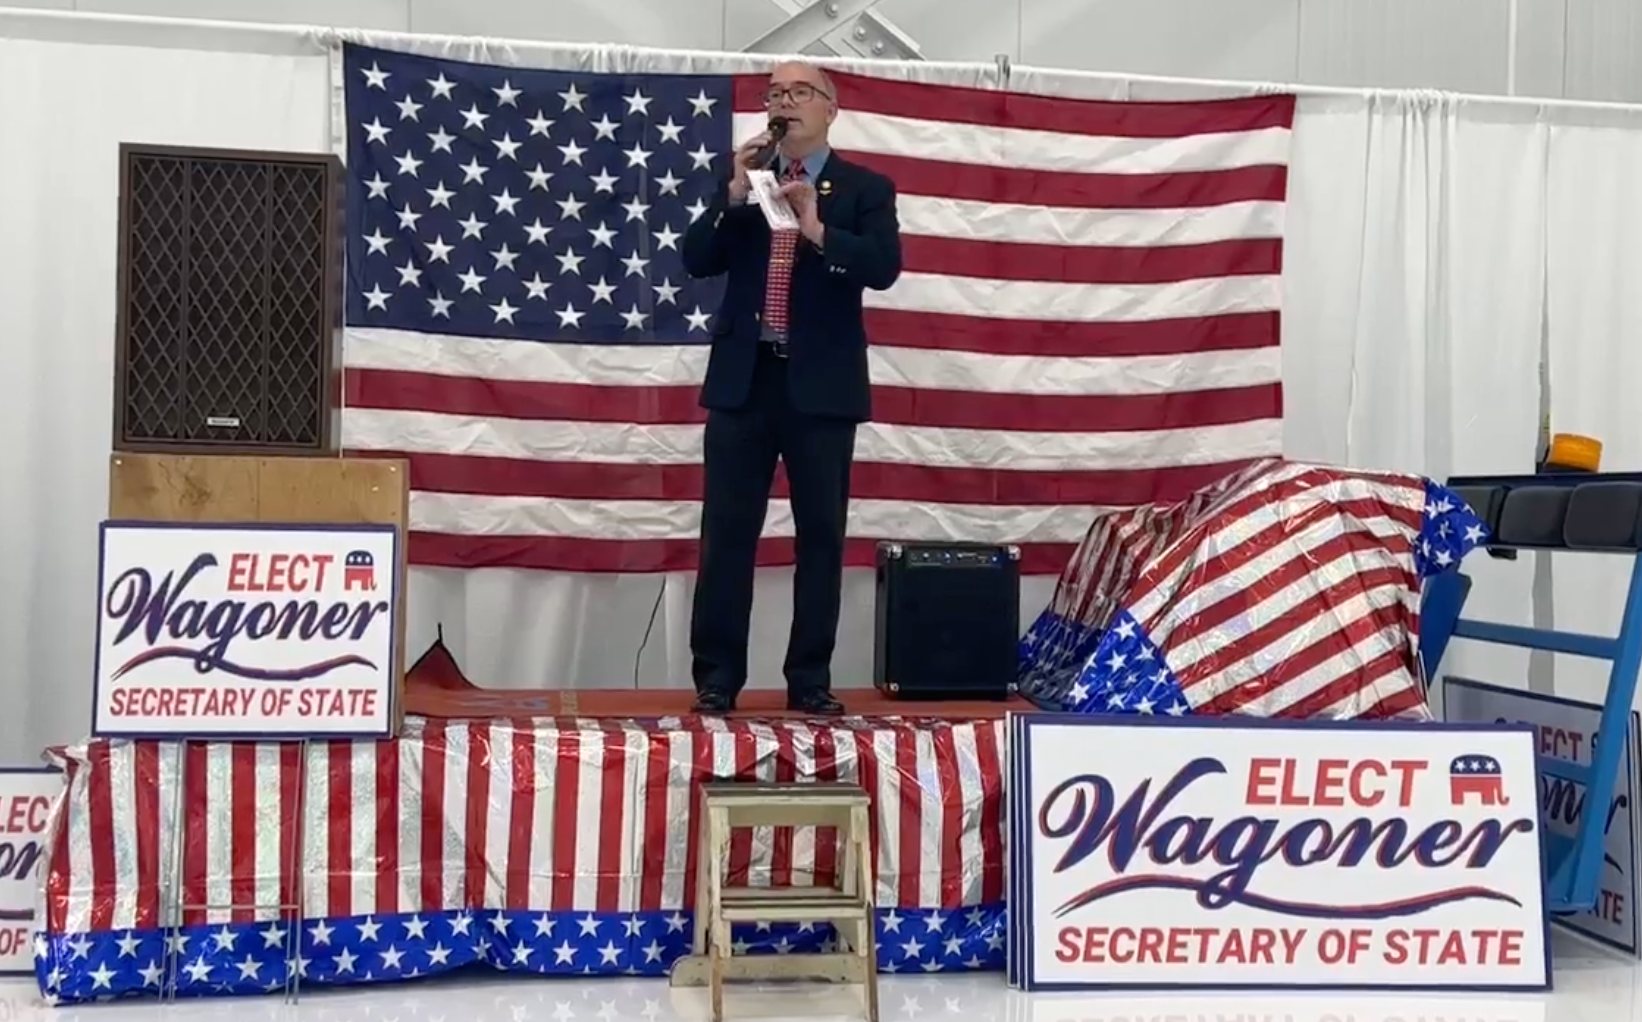 Keith Wagoner speaking at a campaign event